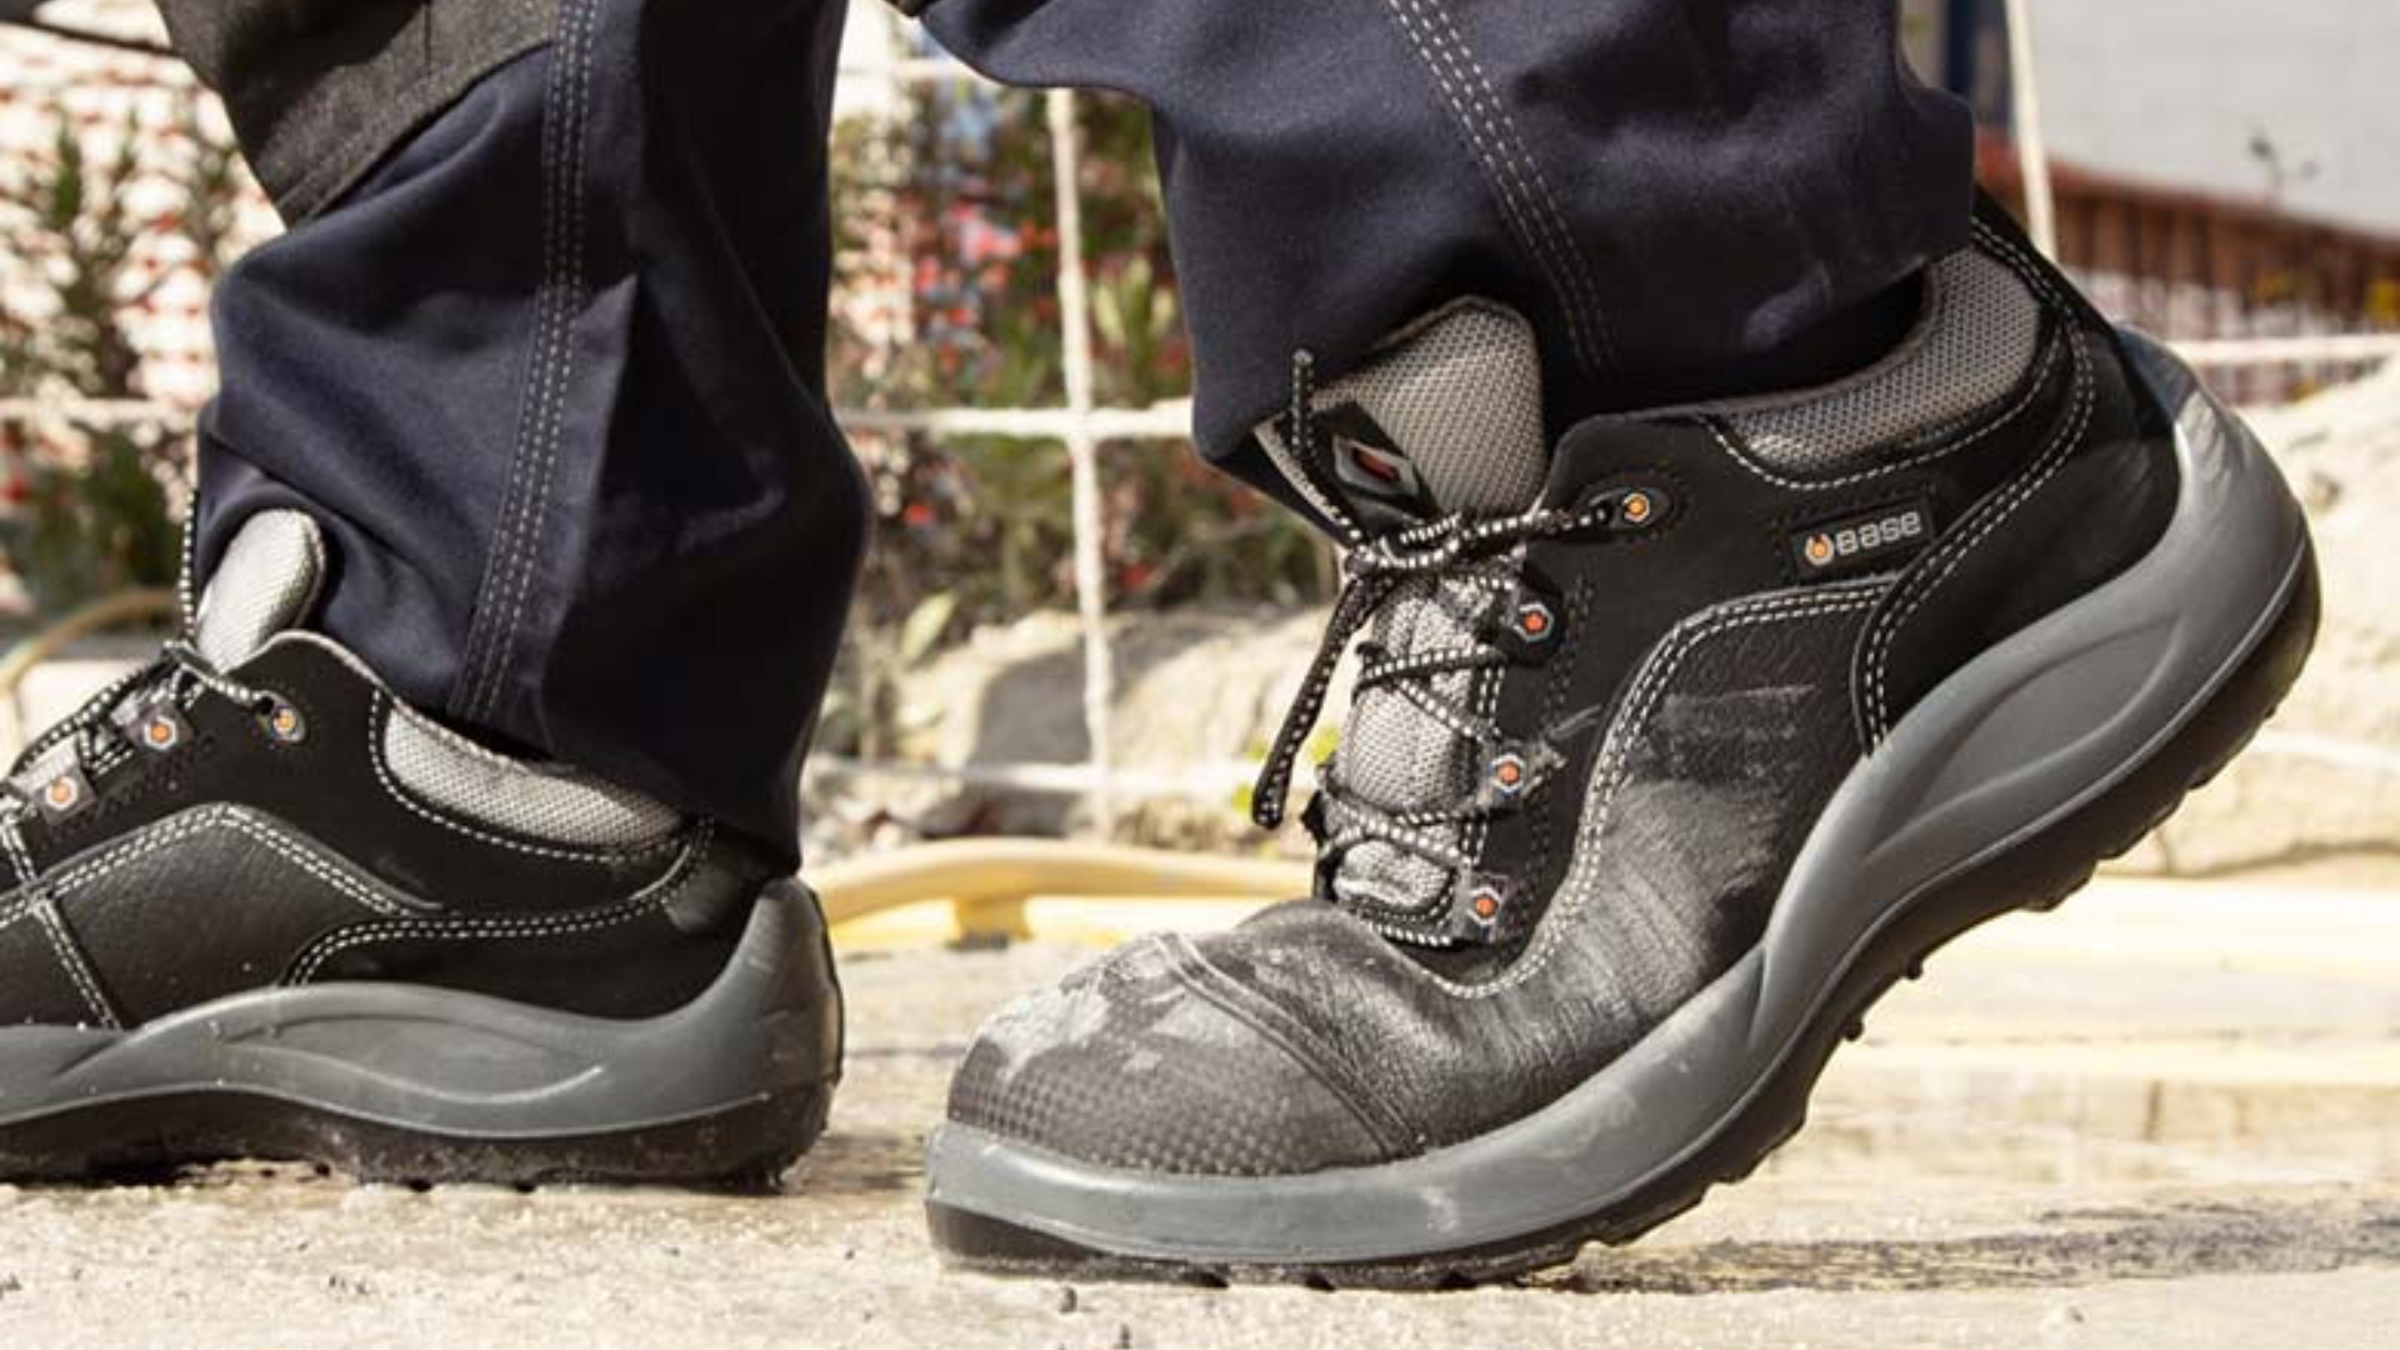 An image of the Base Safety Boots being worn